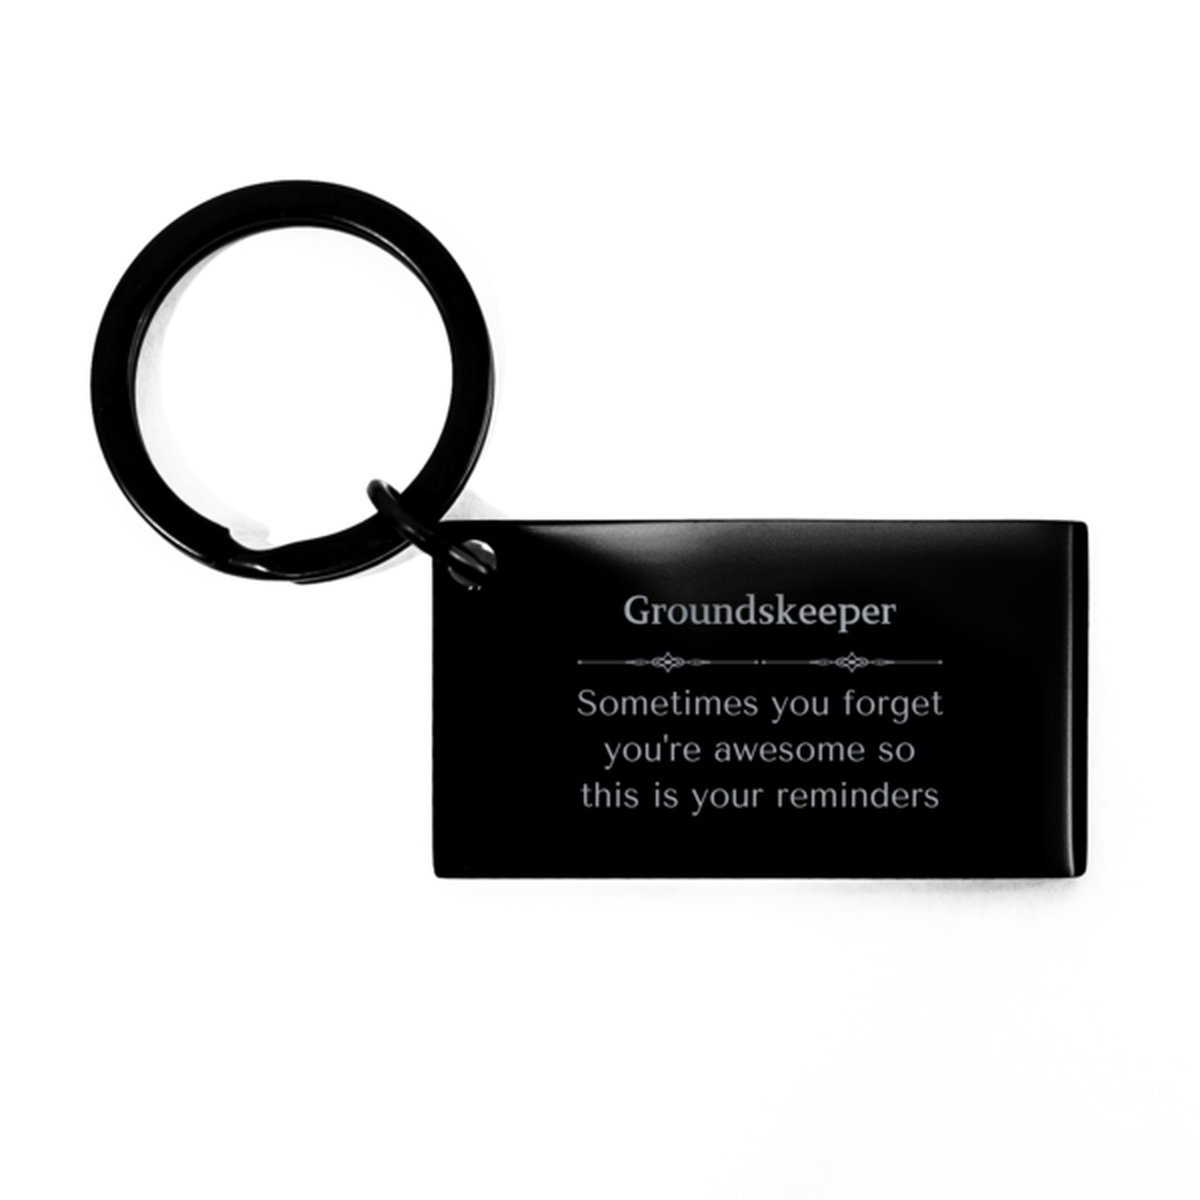 Sentimental Groundskeeper Keychain, Marketing Manager Sometimes you forget you're awesome so this is your reminders, Graduation Christmas Birthday Gifts for Groundskeeper, Men, Women, Coworkers